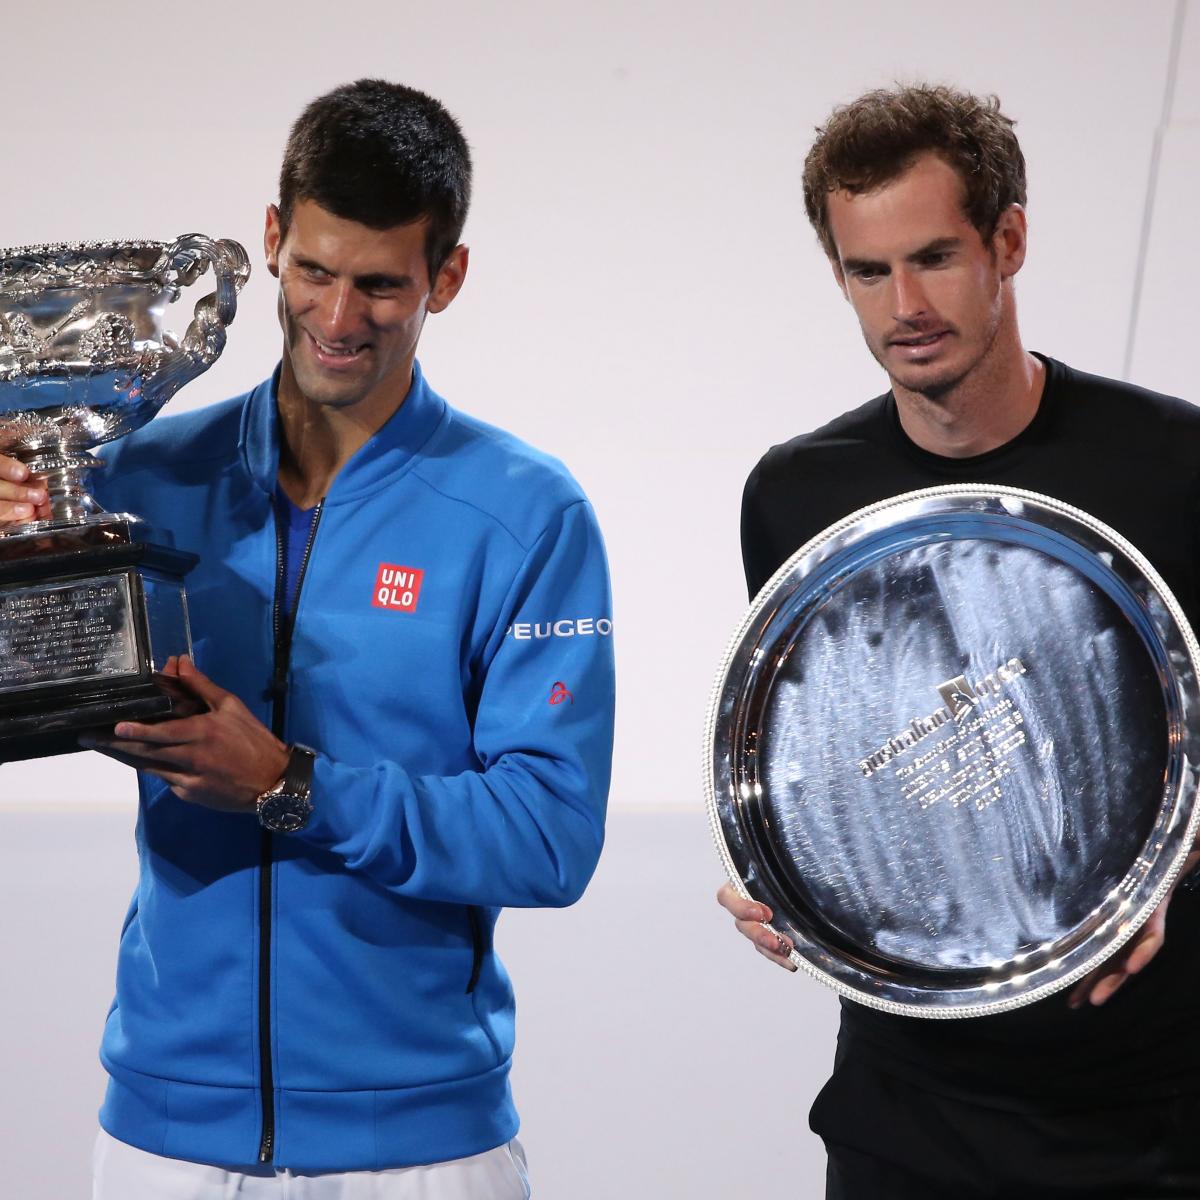 Australian Open 2015: Results, Reaction and More from Djokovic vs. Murray Final ...1200 x 1200